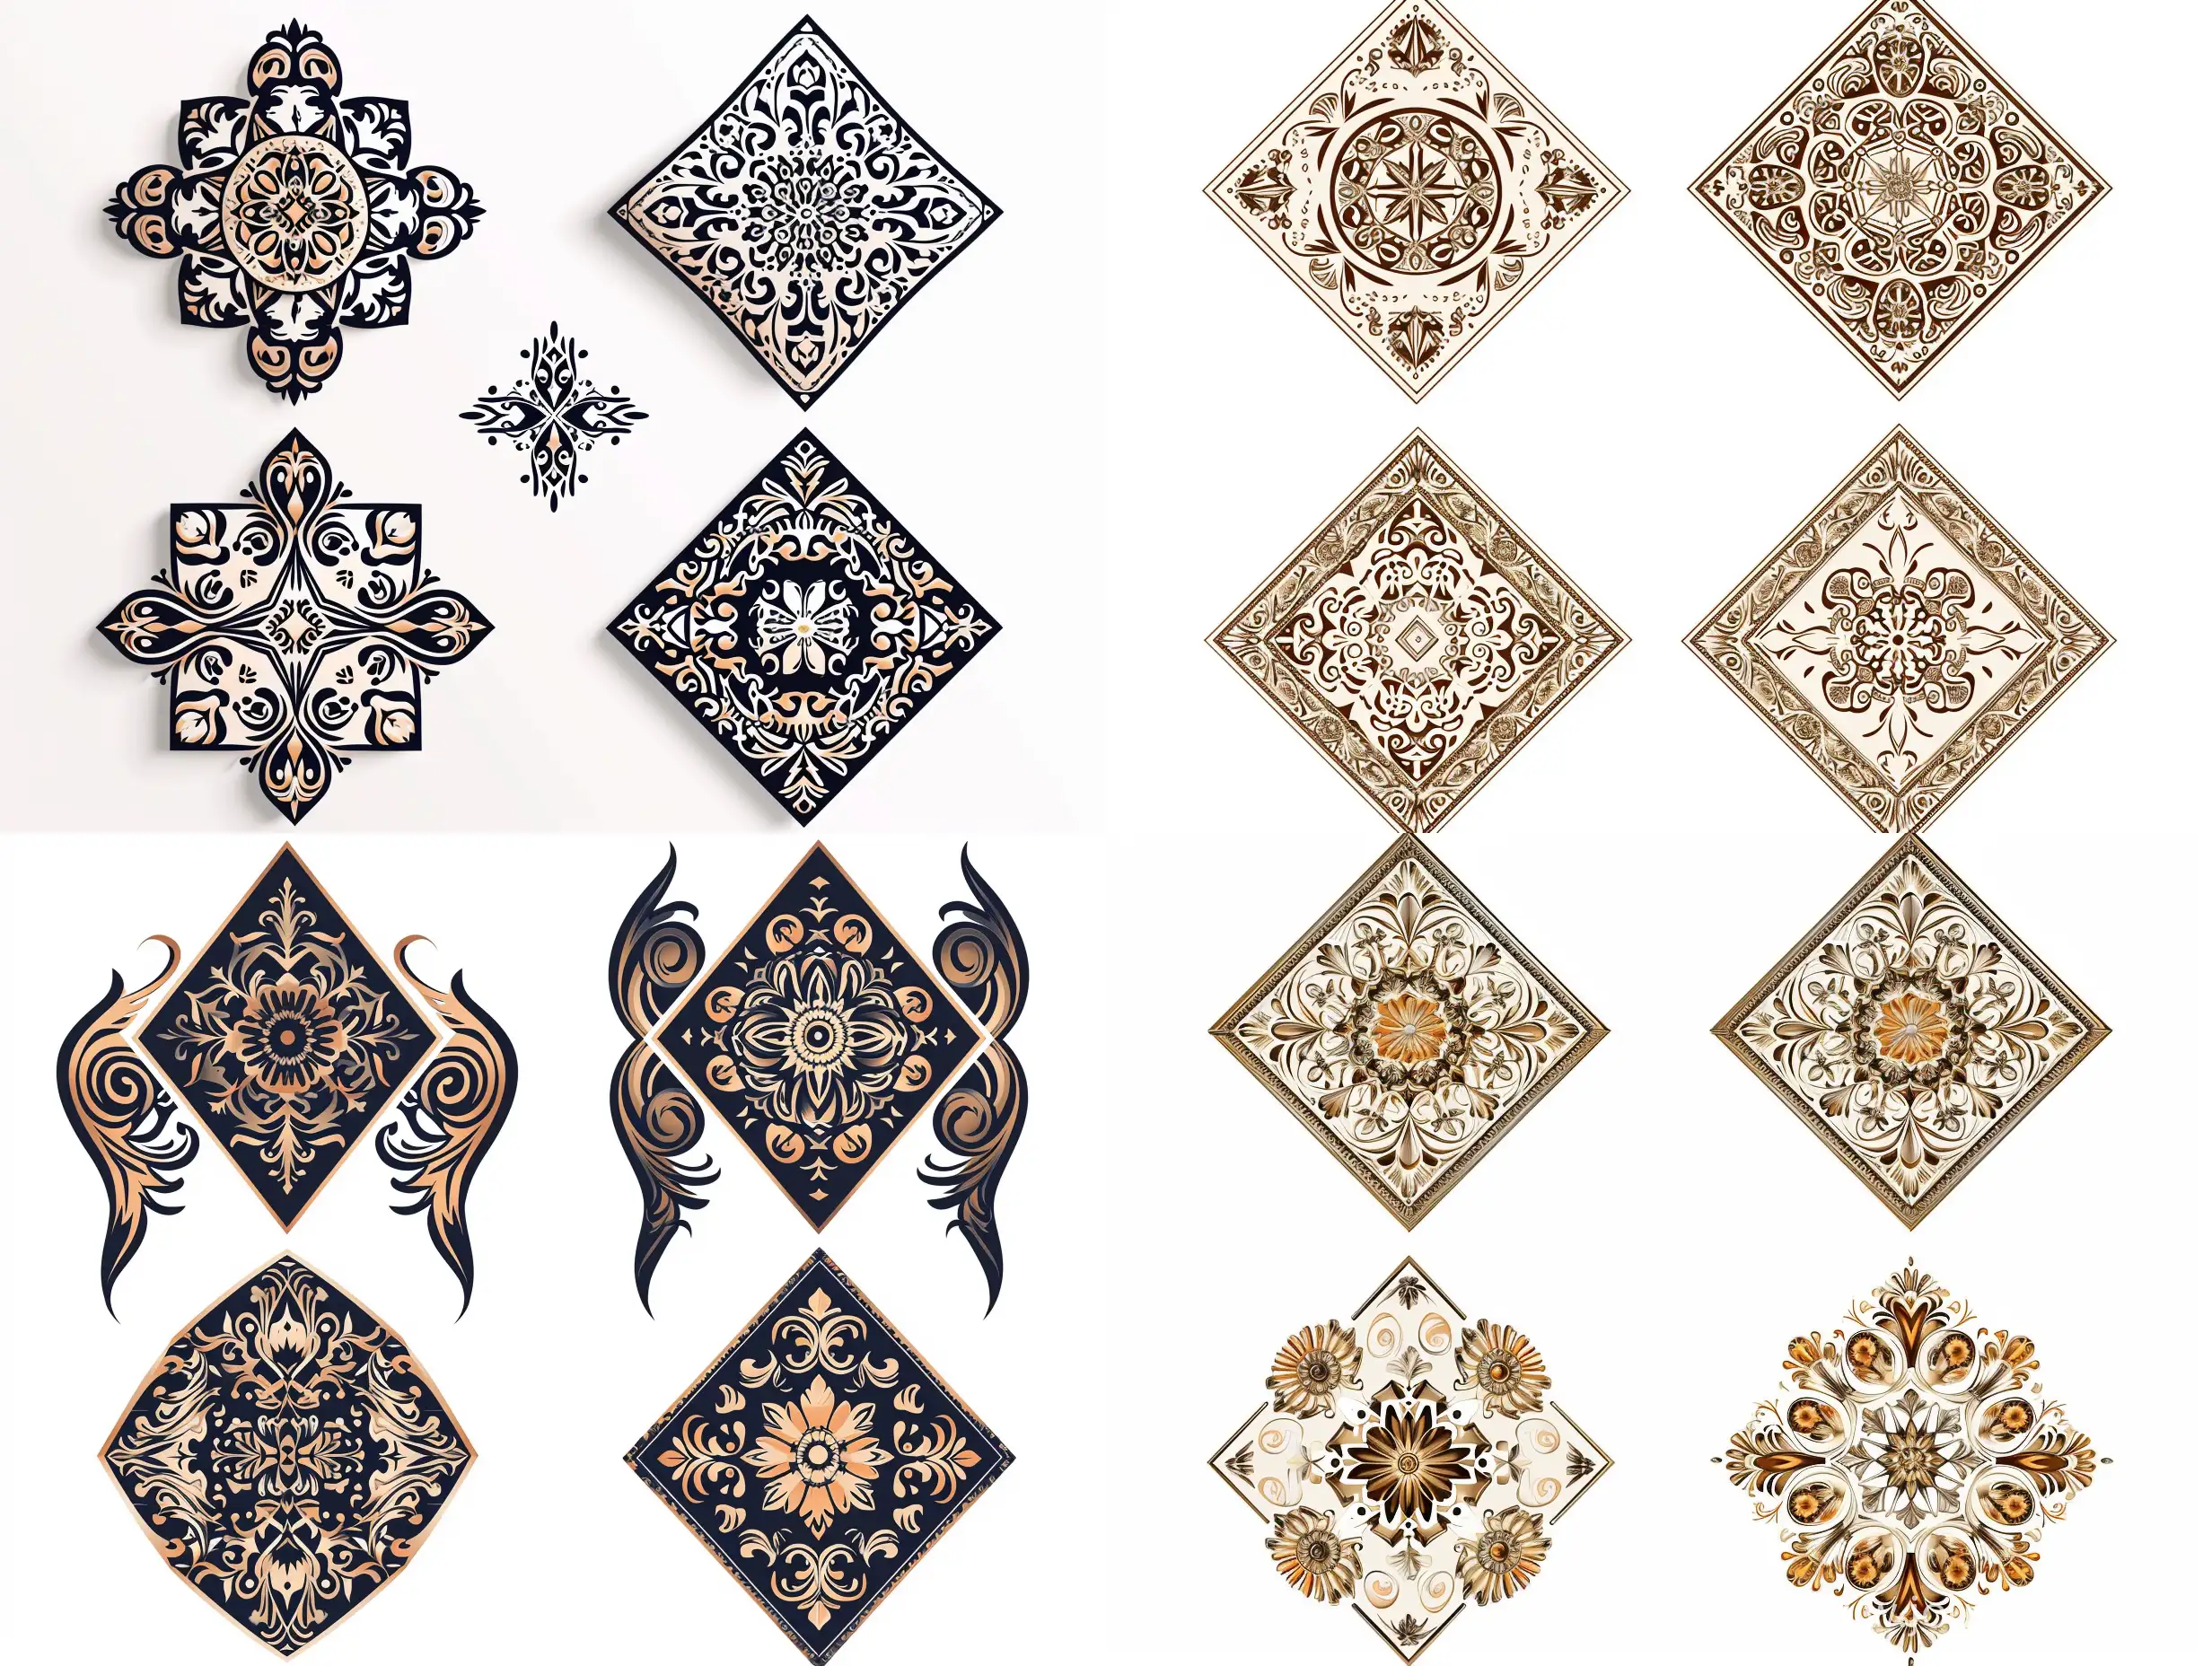 four variants of the ancient ornament, diamond-shaped pattern, many details, on a white background